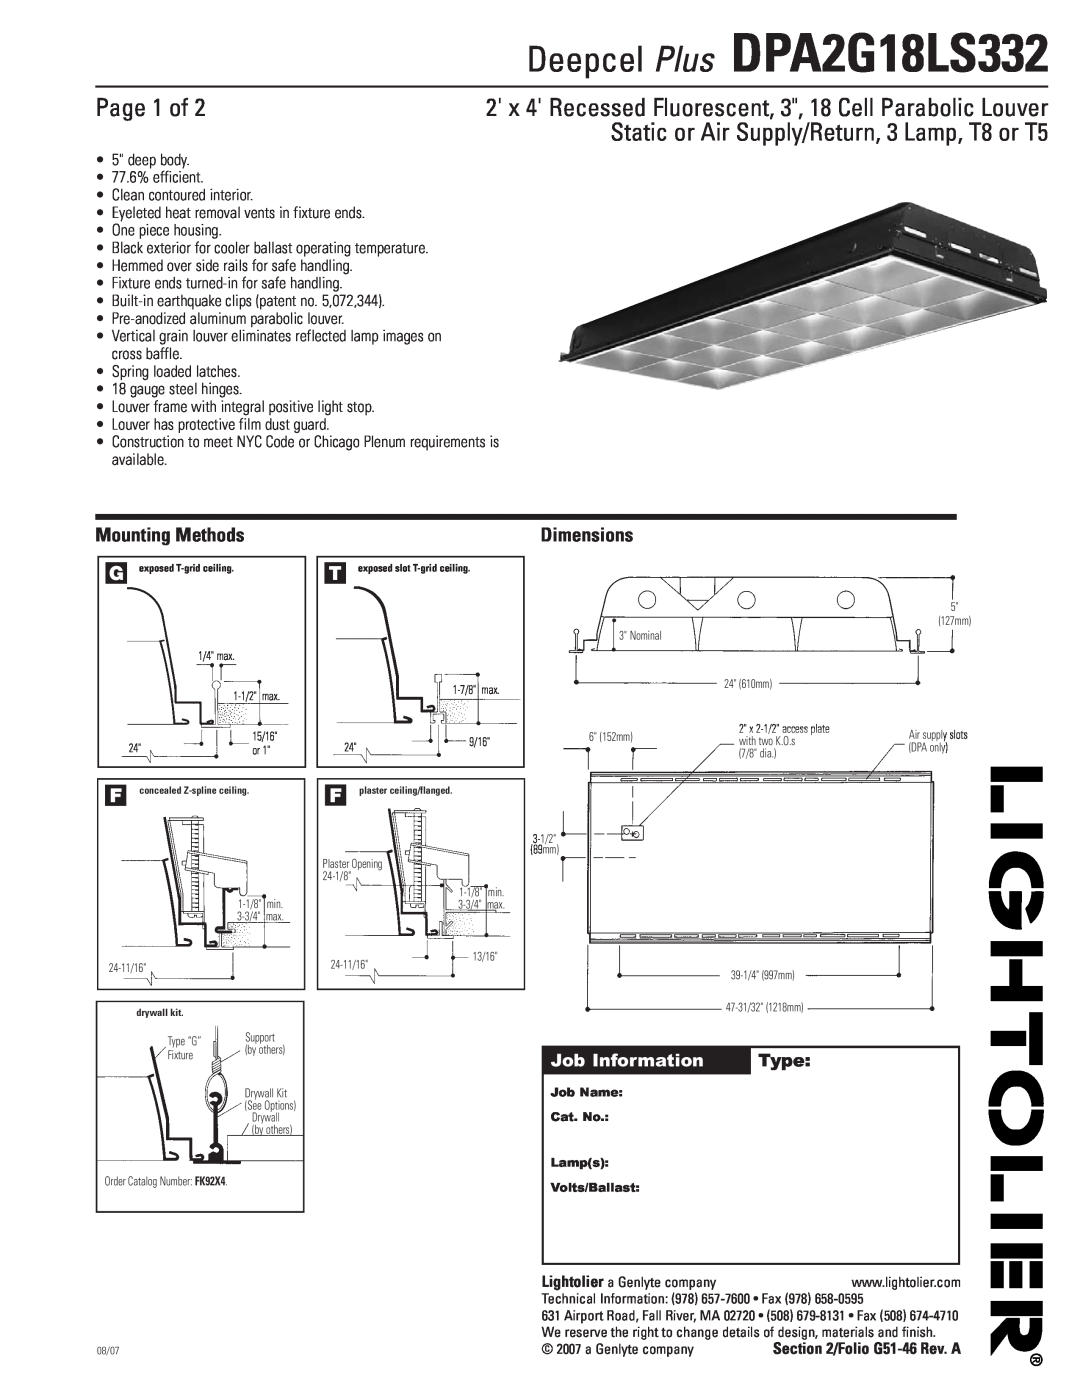 Lightolier DPA2G18LS332 dimensions Page 1 of, Static or Air Supply/Return, 3 Lamp, T8 or T5, Mounting Methods, Dimensions 